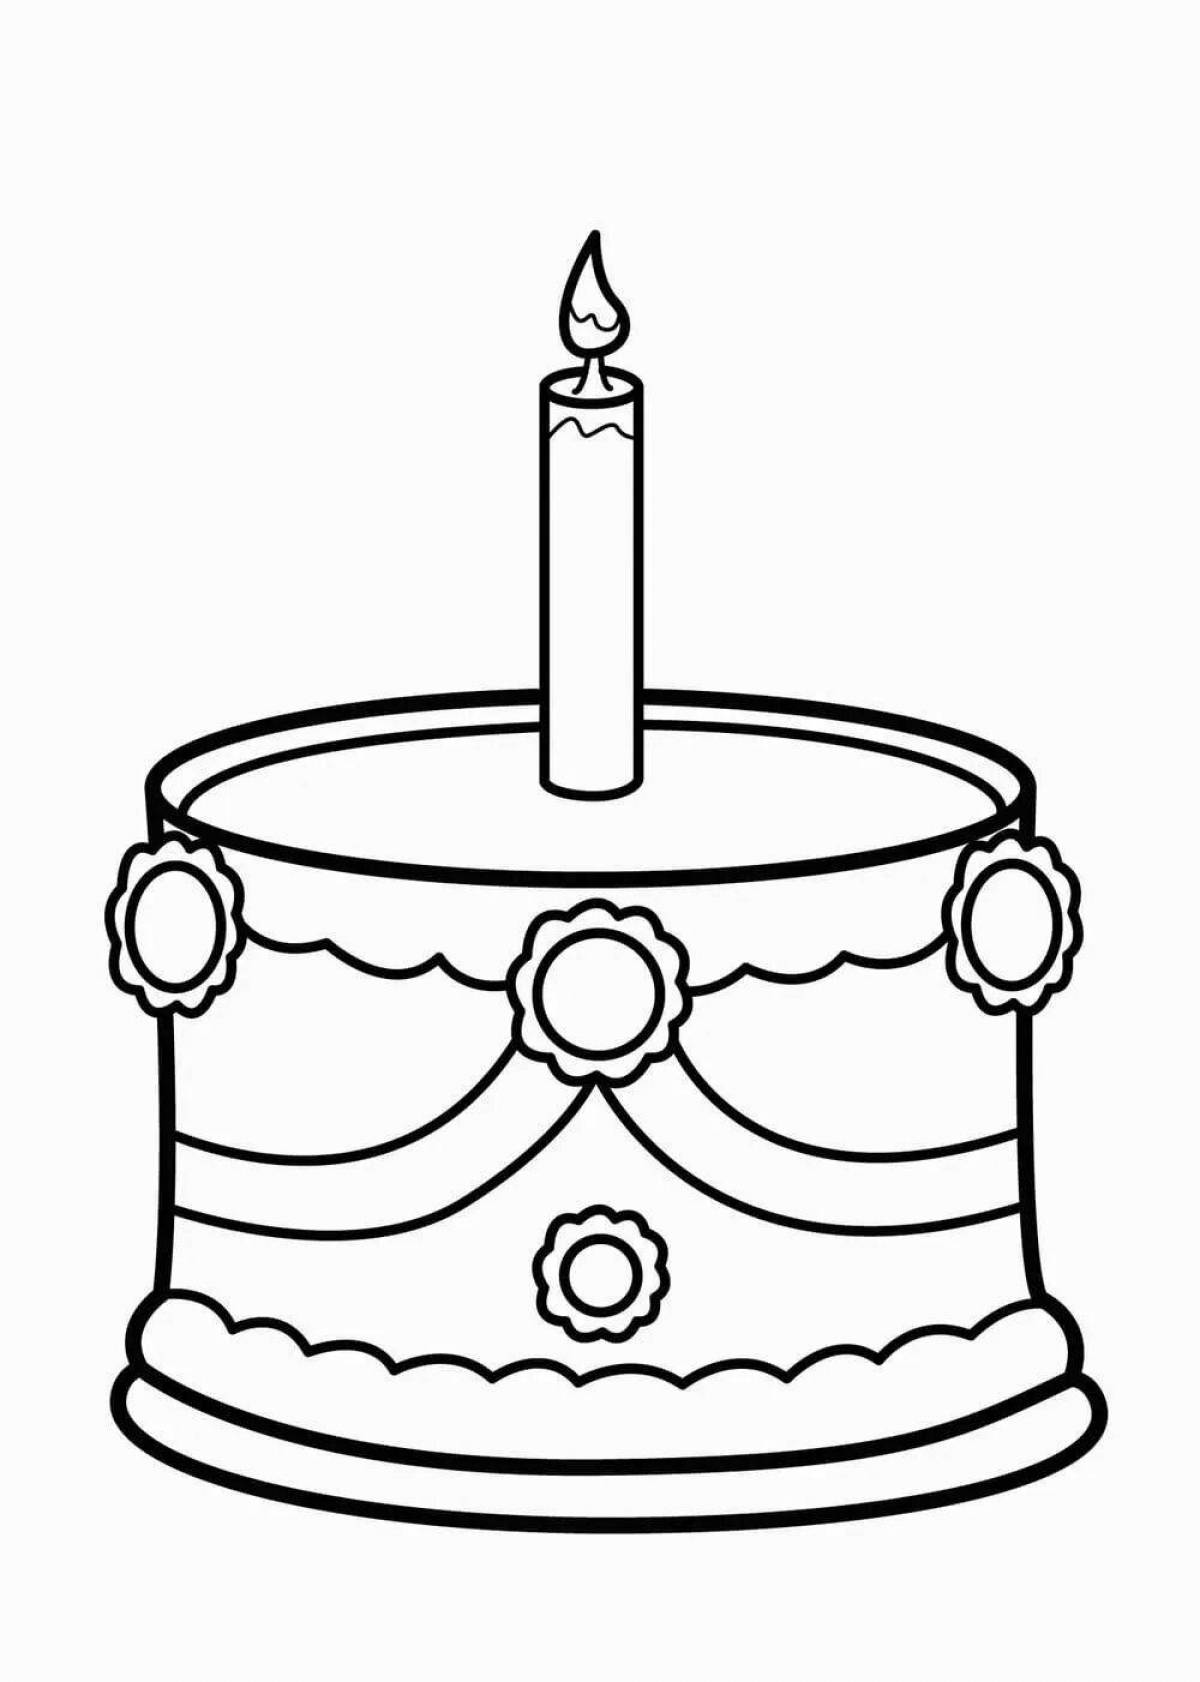 Decorated cake coloring book